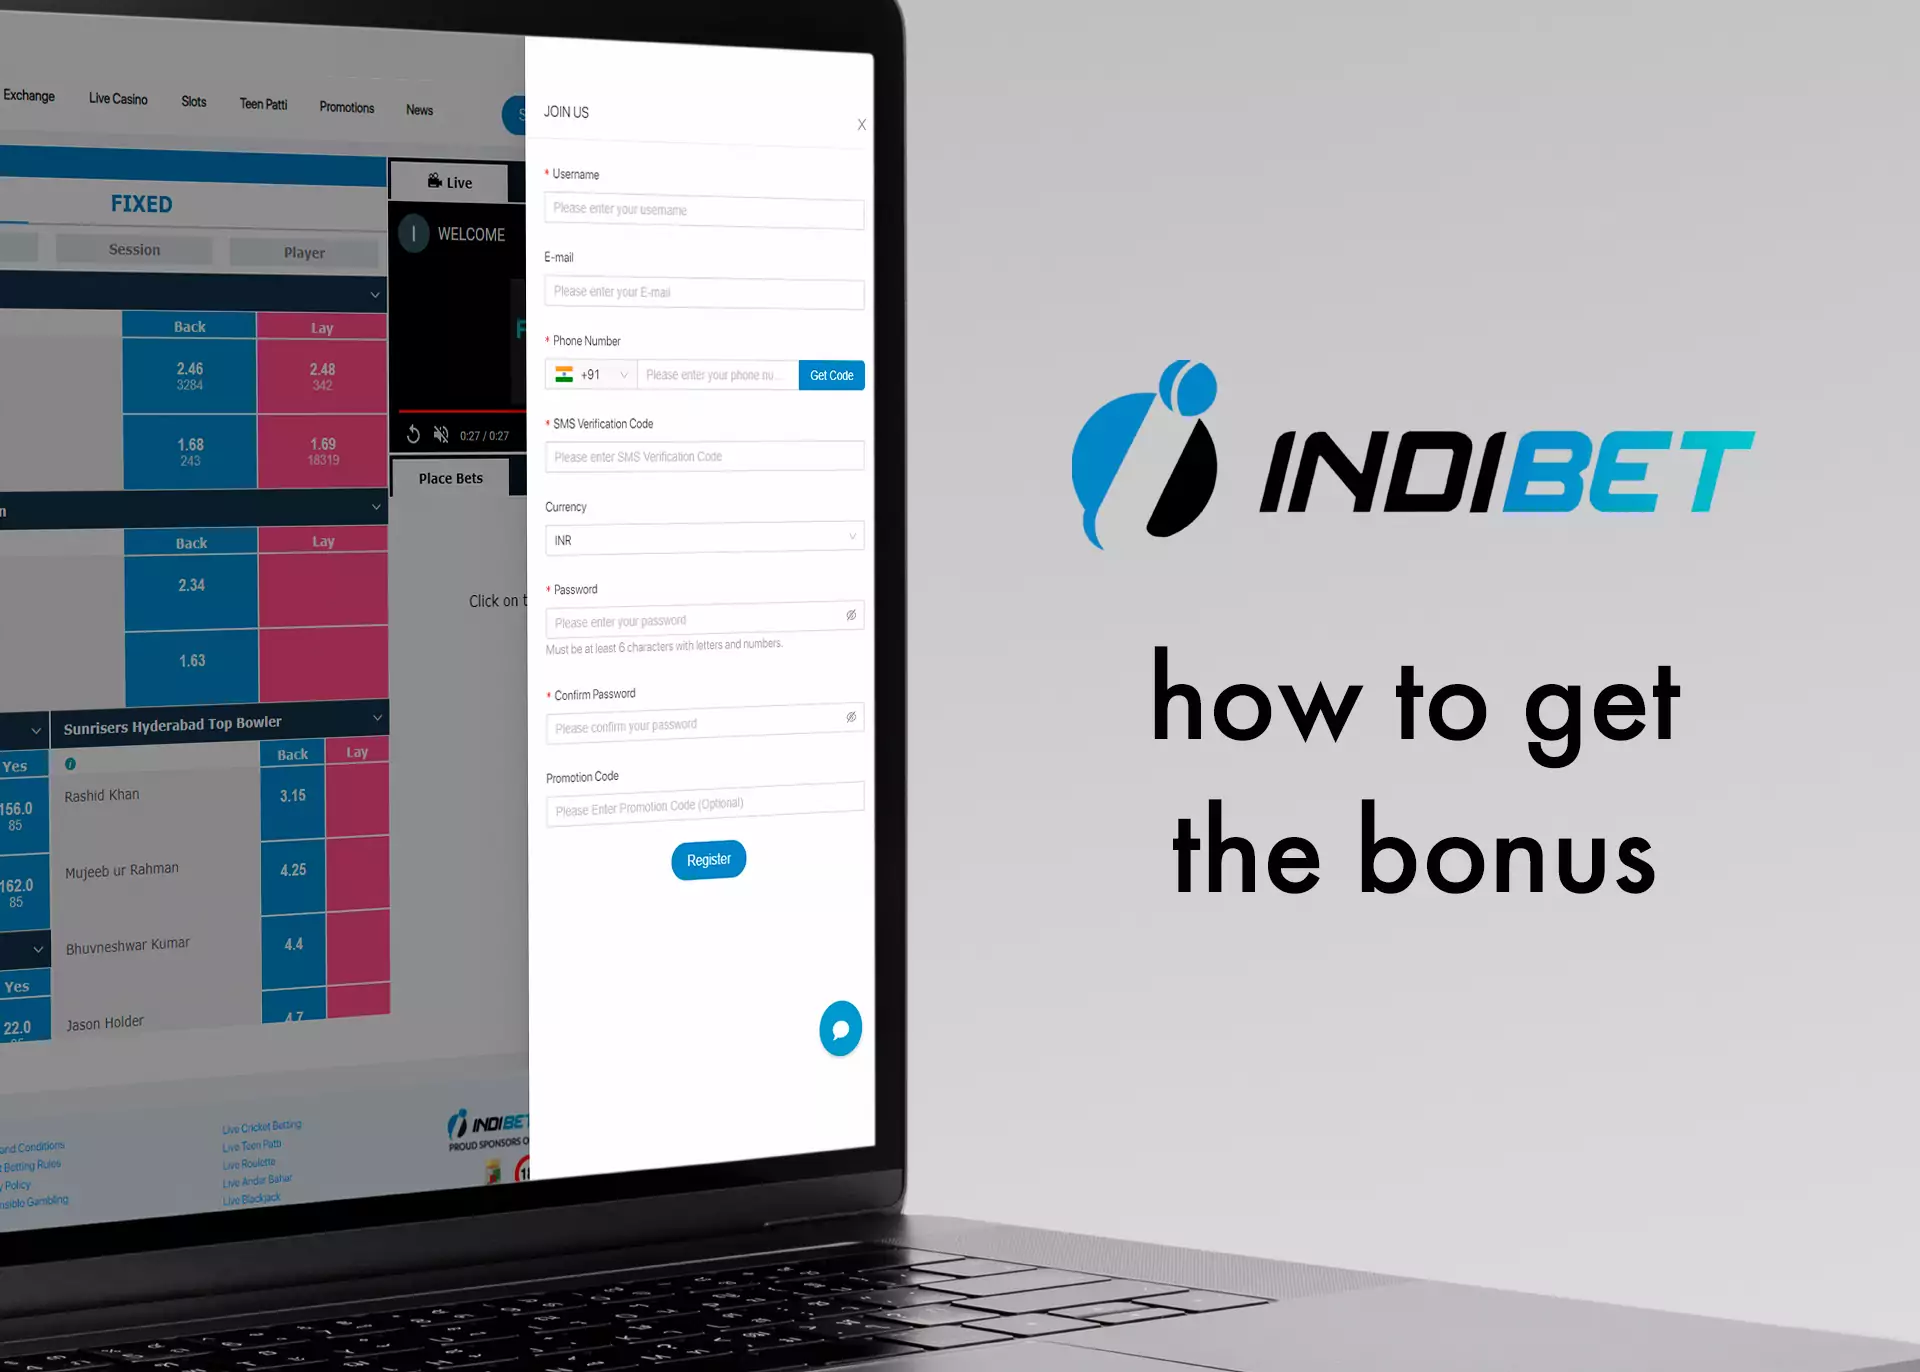 To claim the welcome bonus you need to sign up on the site.